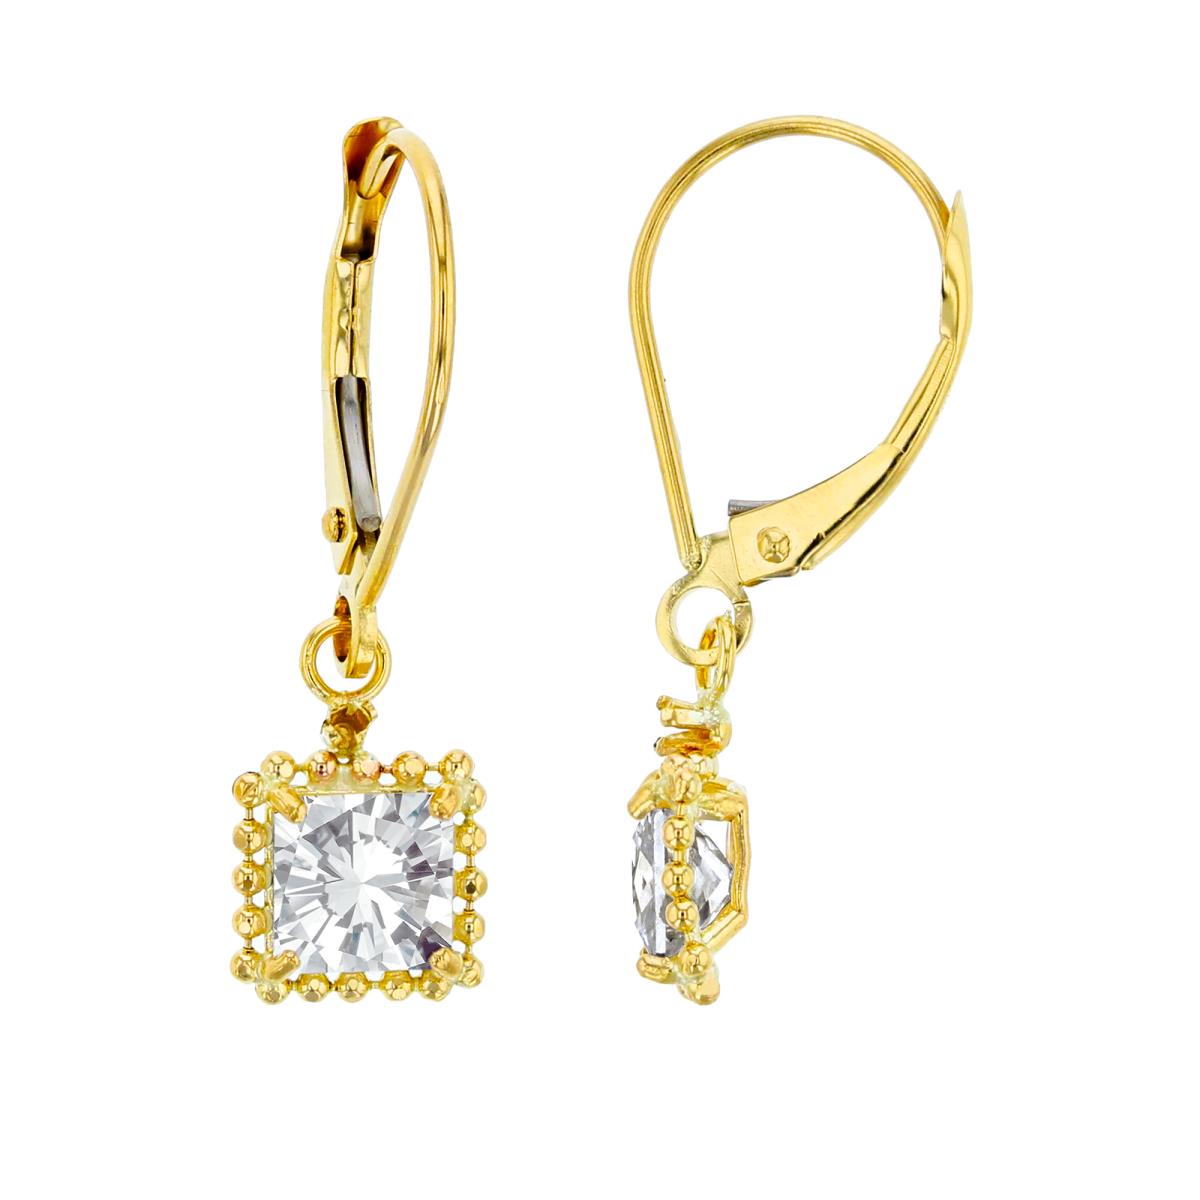 14K Yellow Gold 1.25mm Rd Created White Sapphire & 5mm Sq White Topaz Bead Frame Drop Lever-Back Earring